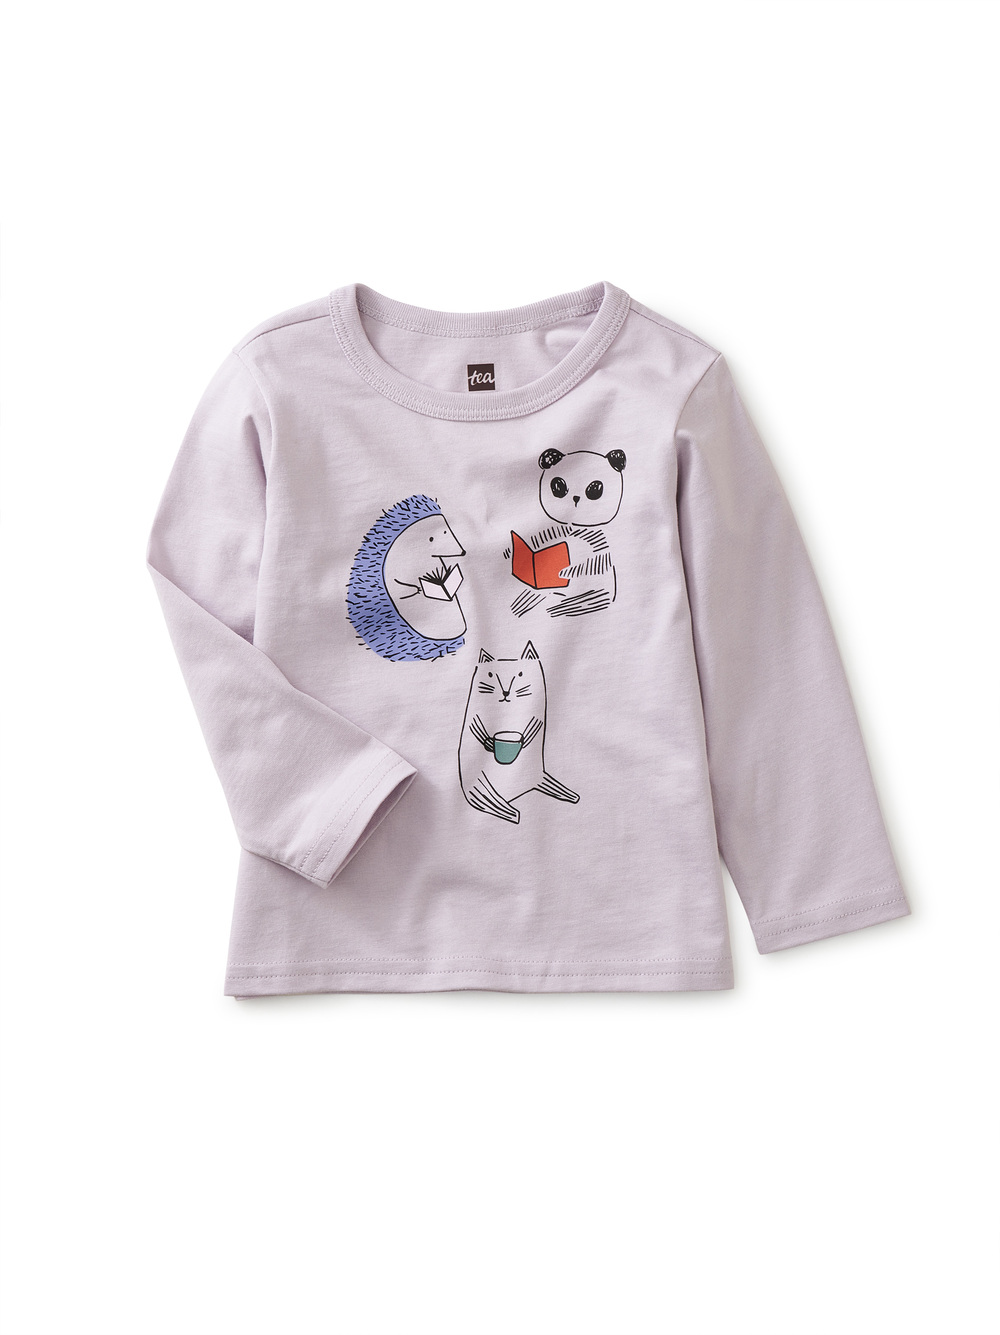 Cute Critters Baby Graphic Tee